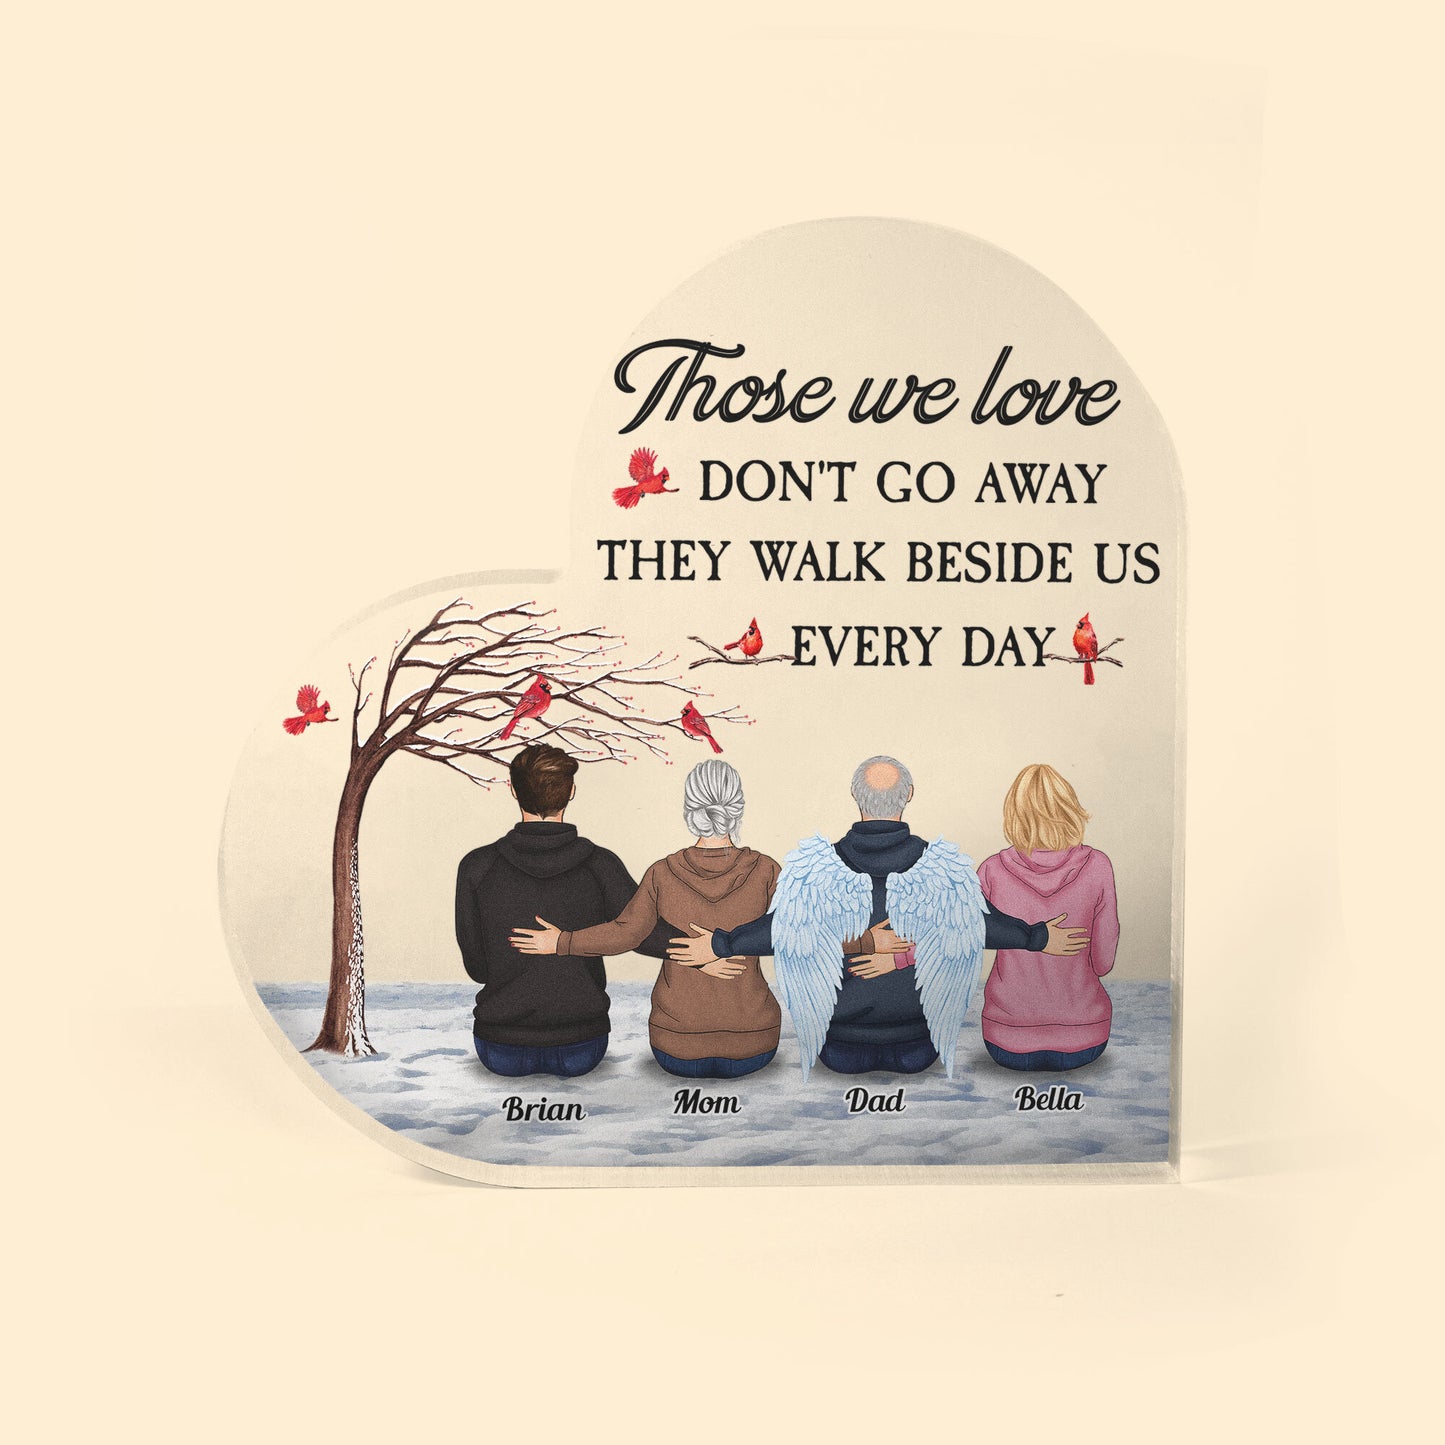 Those We Love Don't Go Away - Personalized Heart-Shaped Acrylic Plaque - Memorial Gift For Loss Of Family Members, Mom, Dad, Grief Gift